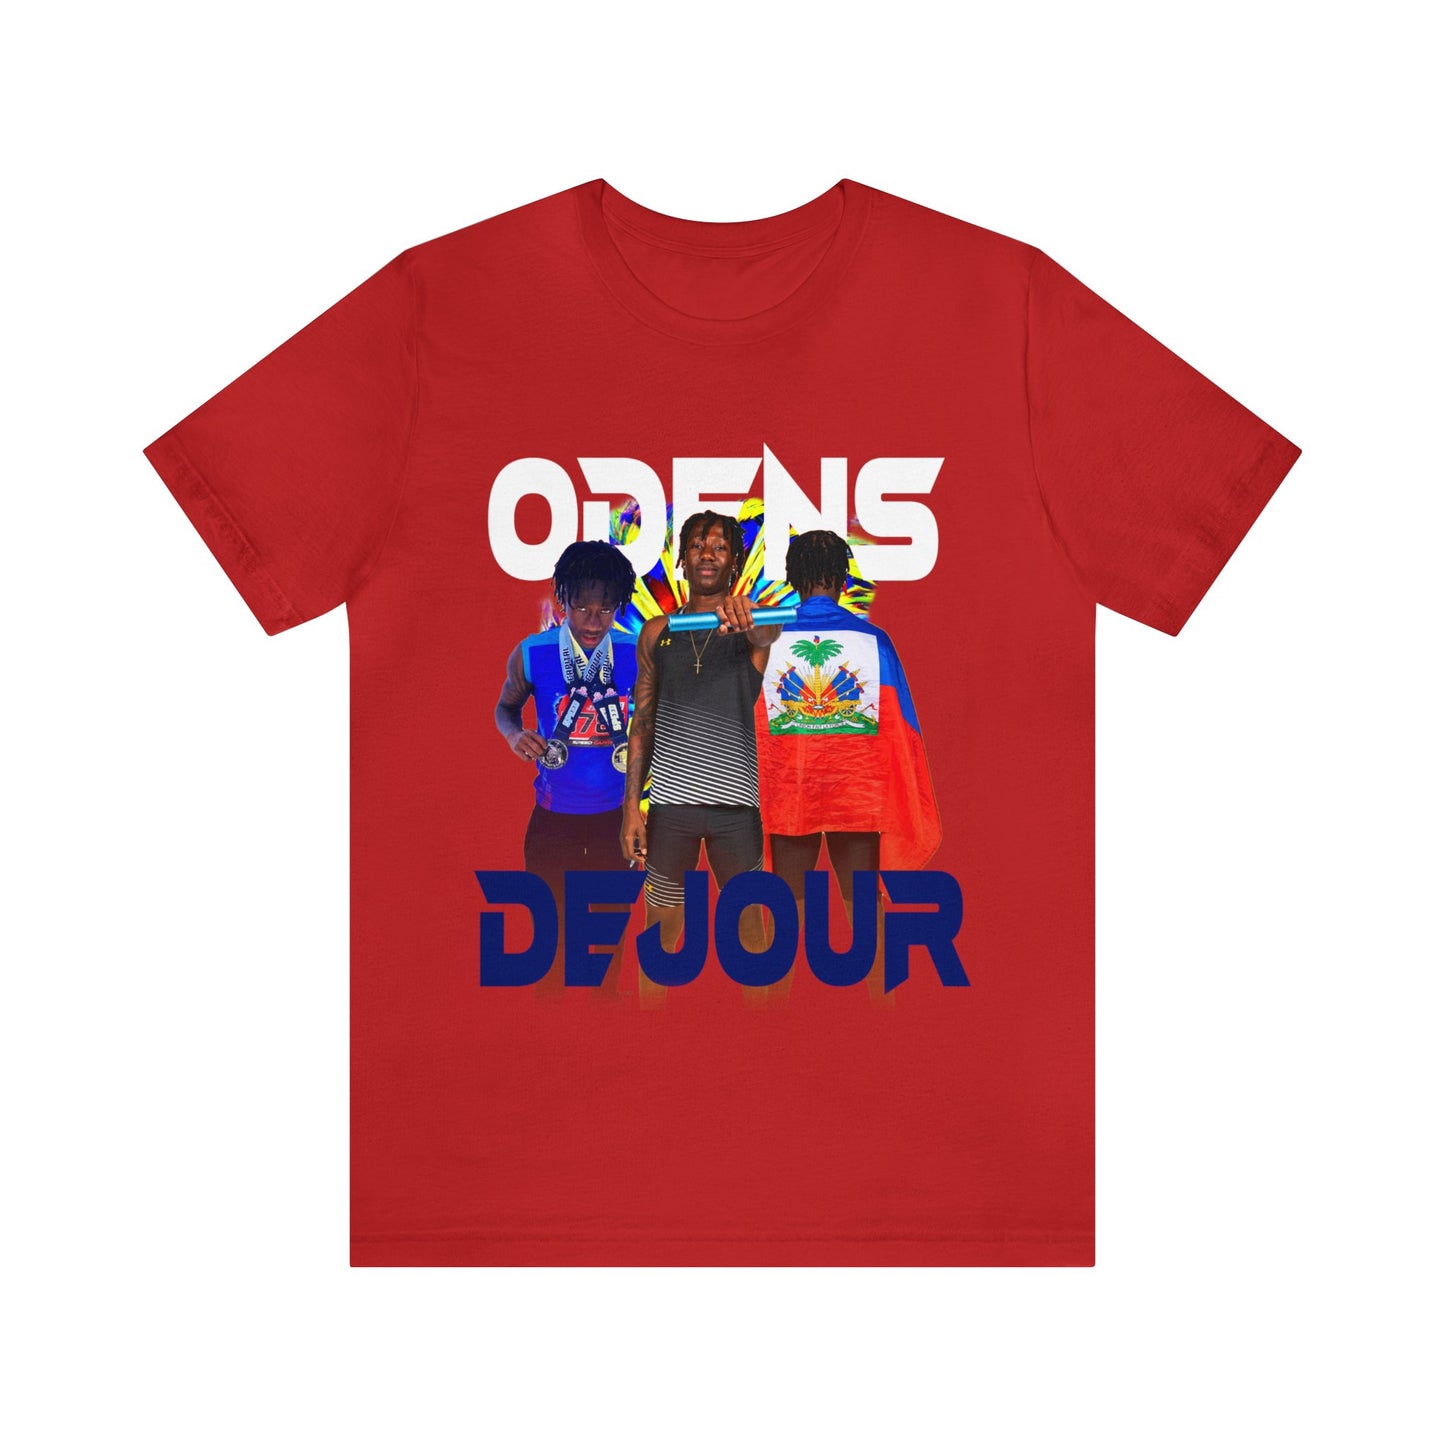 Odens Dejour: Essential Tee